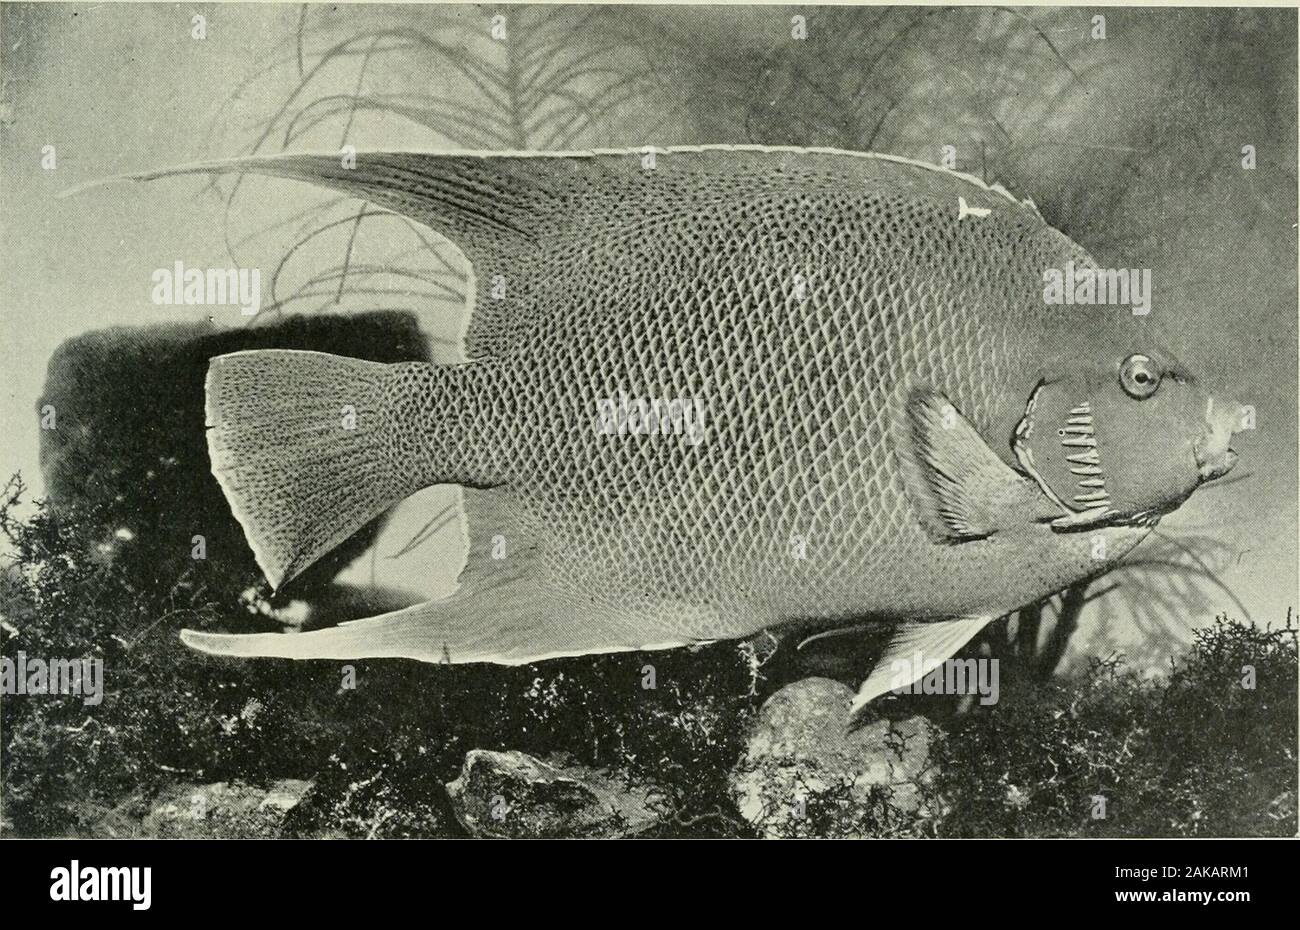 American food and game fishes : a popular account of all the species found in America, north of the equator, with keys for ready identification, life histories and methods of capture . BLACi: AXGEL-FISII, Poi&gt; acanthu; arcuati.. ;LL0W or blue ANGEL-FISH, Holacautln ADUL The Butterfly-Fishes Indies and north to the Bermudas, but it has not been found inthe United States. Elegant specimens were obtained by us atArroyo and Isabel Segunda, Porto Rico, where it is not rare.It reaches a foot or more in length and is used as food. Colour in life, caudal, pectoral and ventral fins and anteriorthird Stock Photo